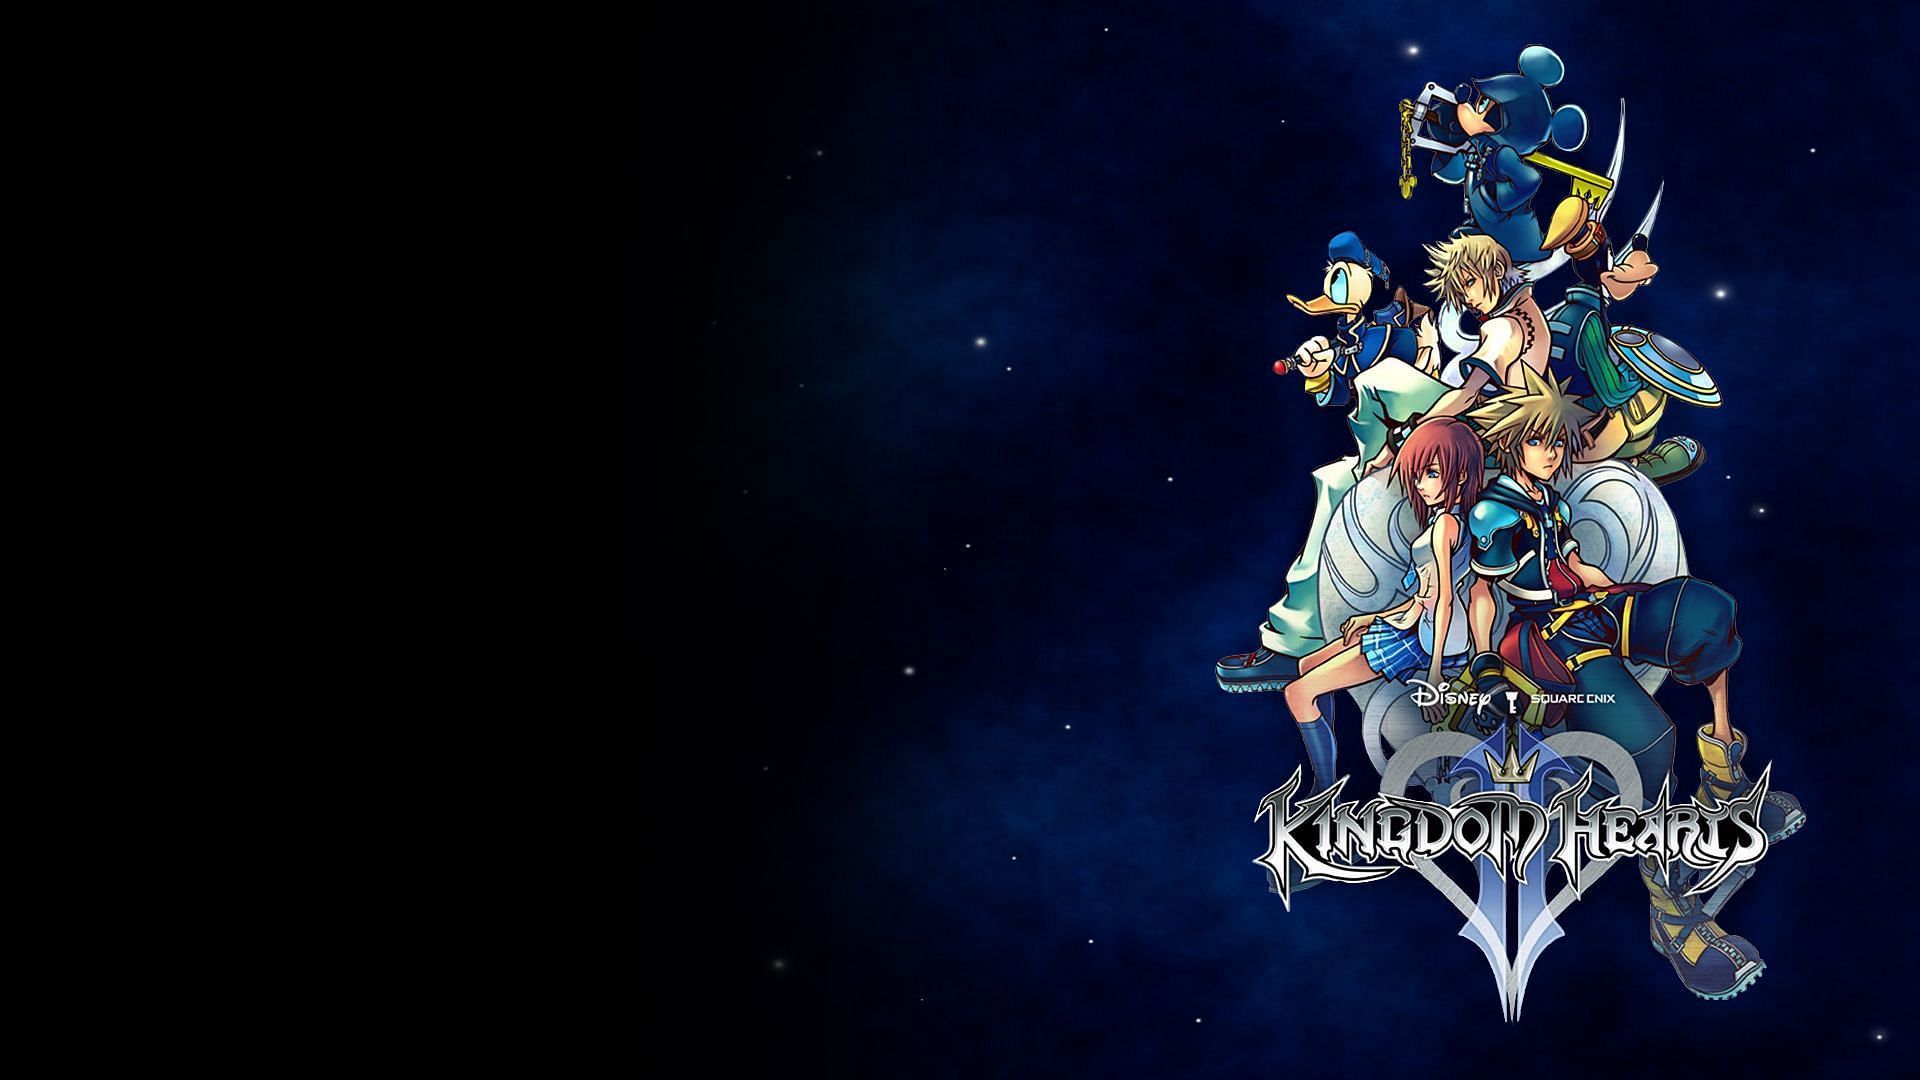 Play alongside Sora and Goofy and other iconic characters to battle an evil organisation (Image via Square Enix)